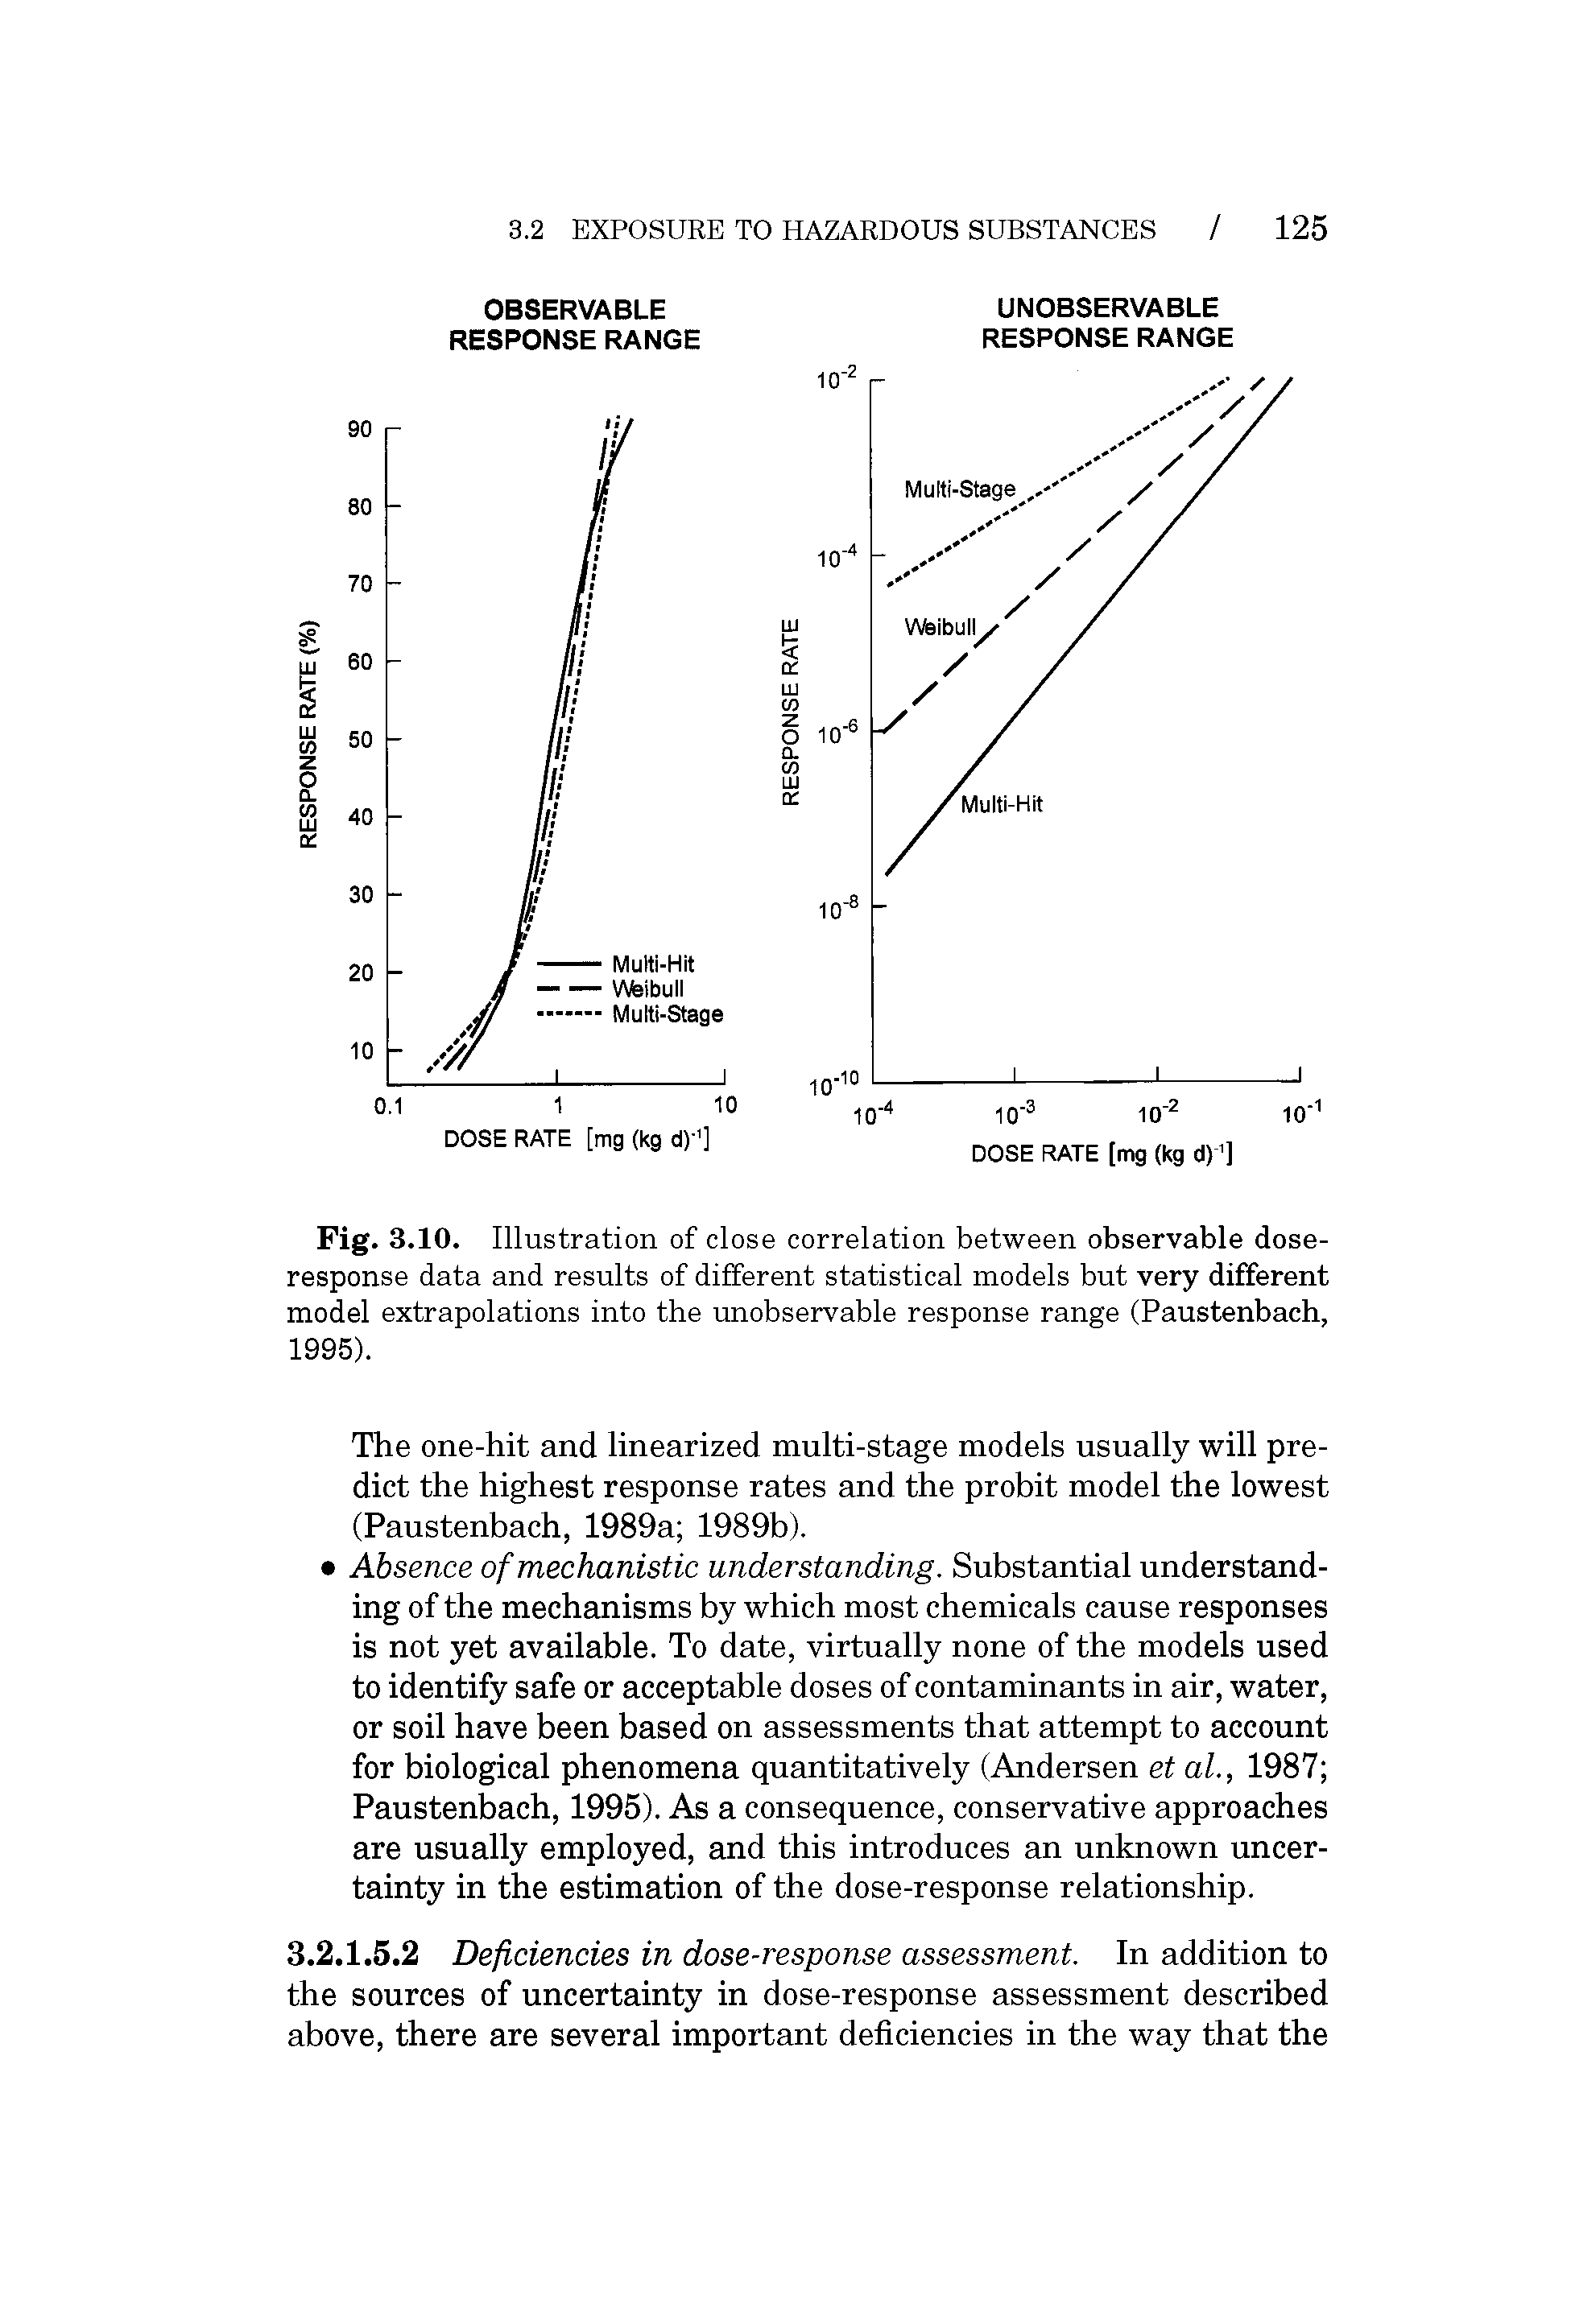 Fig. 3.10. Illustration of close correlation between observable dose-response data and results of different statistical models but very different model extrapolations into the unobservable response range (Paustenbach, 1995).